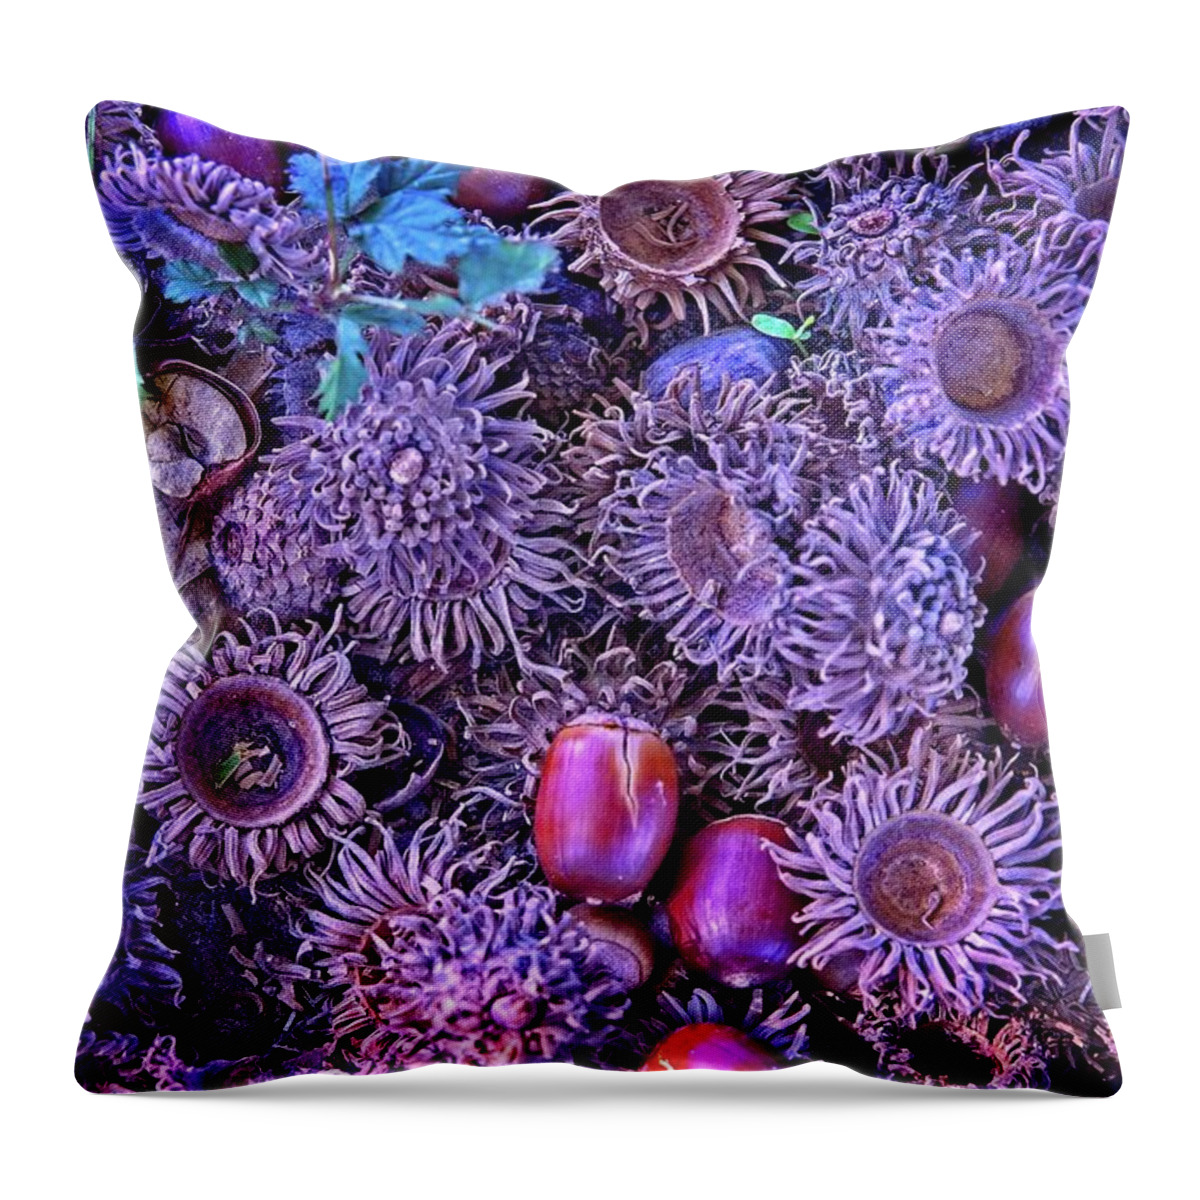 Abstract Throw Pillow featuring the digital art Acorns, Pods, And Seeds by David Desautel